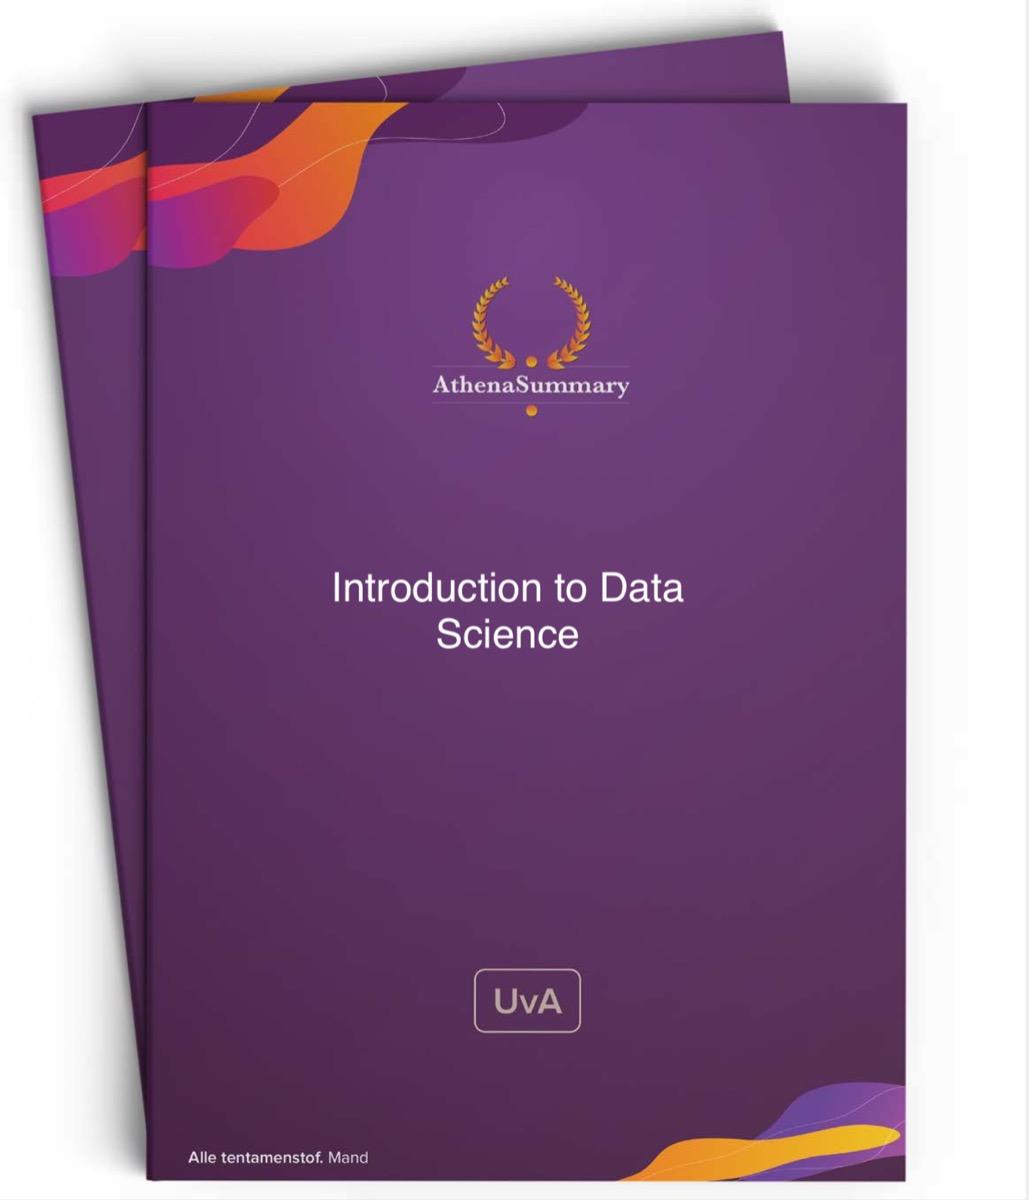 Literature Summary: Introduction to Data Science